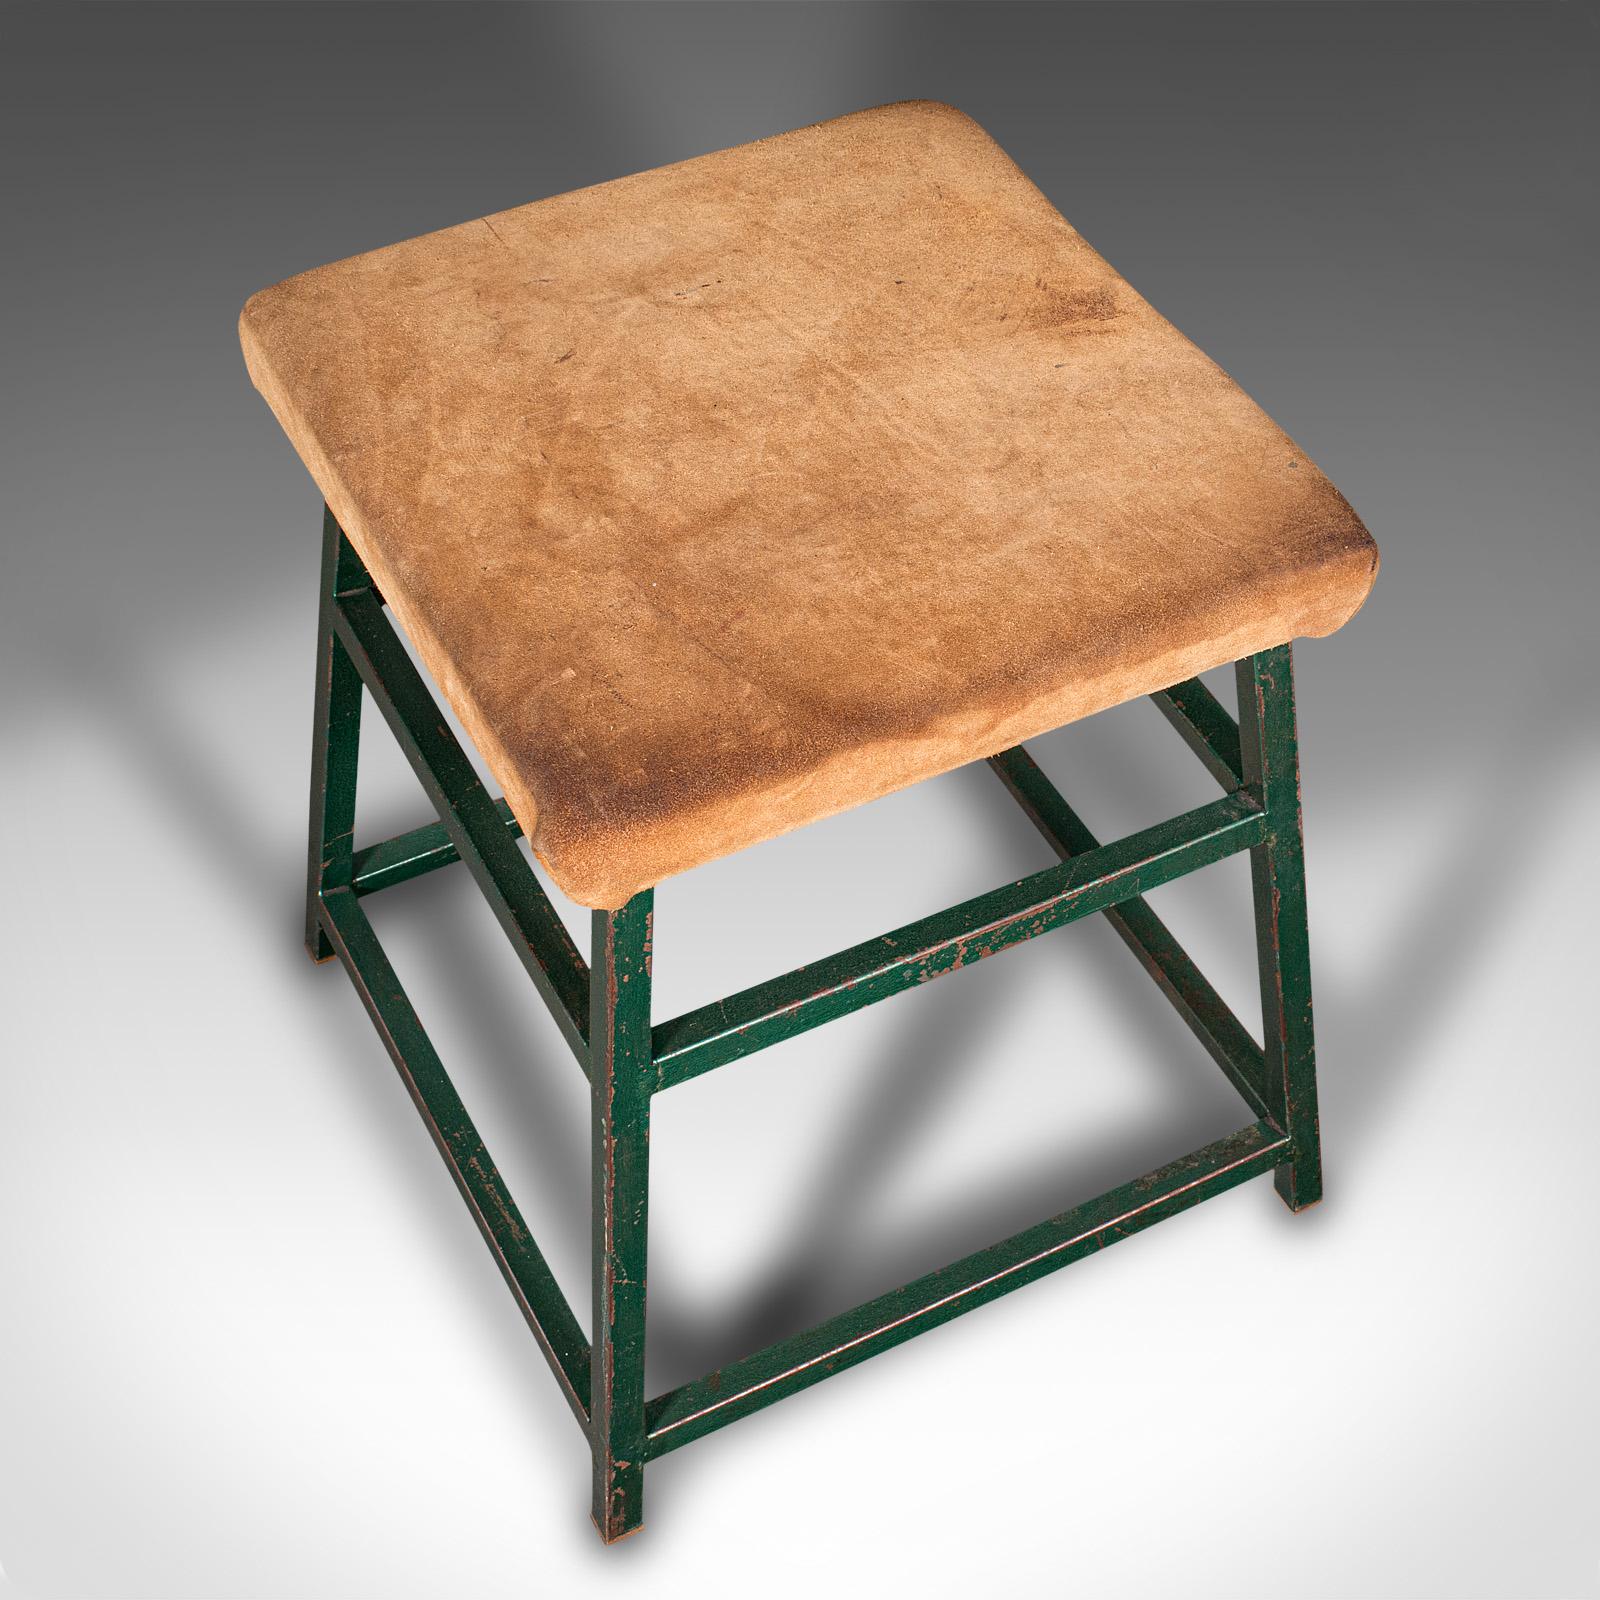 20th Century Large Vintage Industrial Lab Stool, English, Suede, Kitchen, Office Seat, C.1950 For Sale